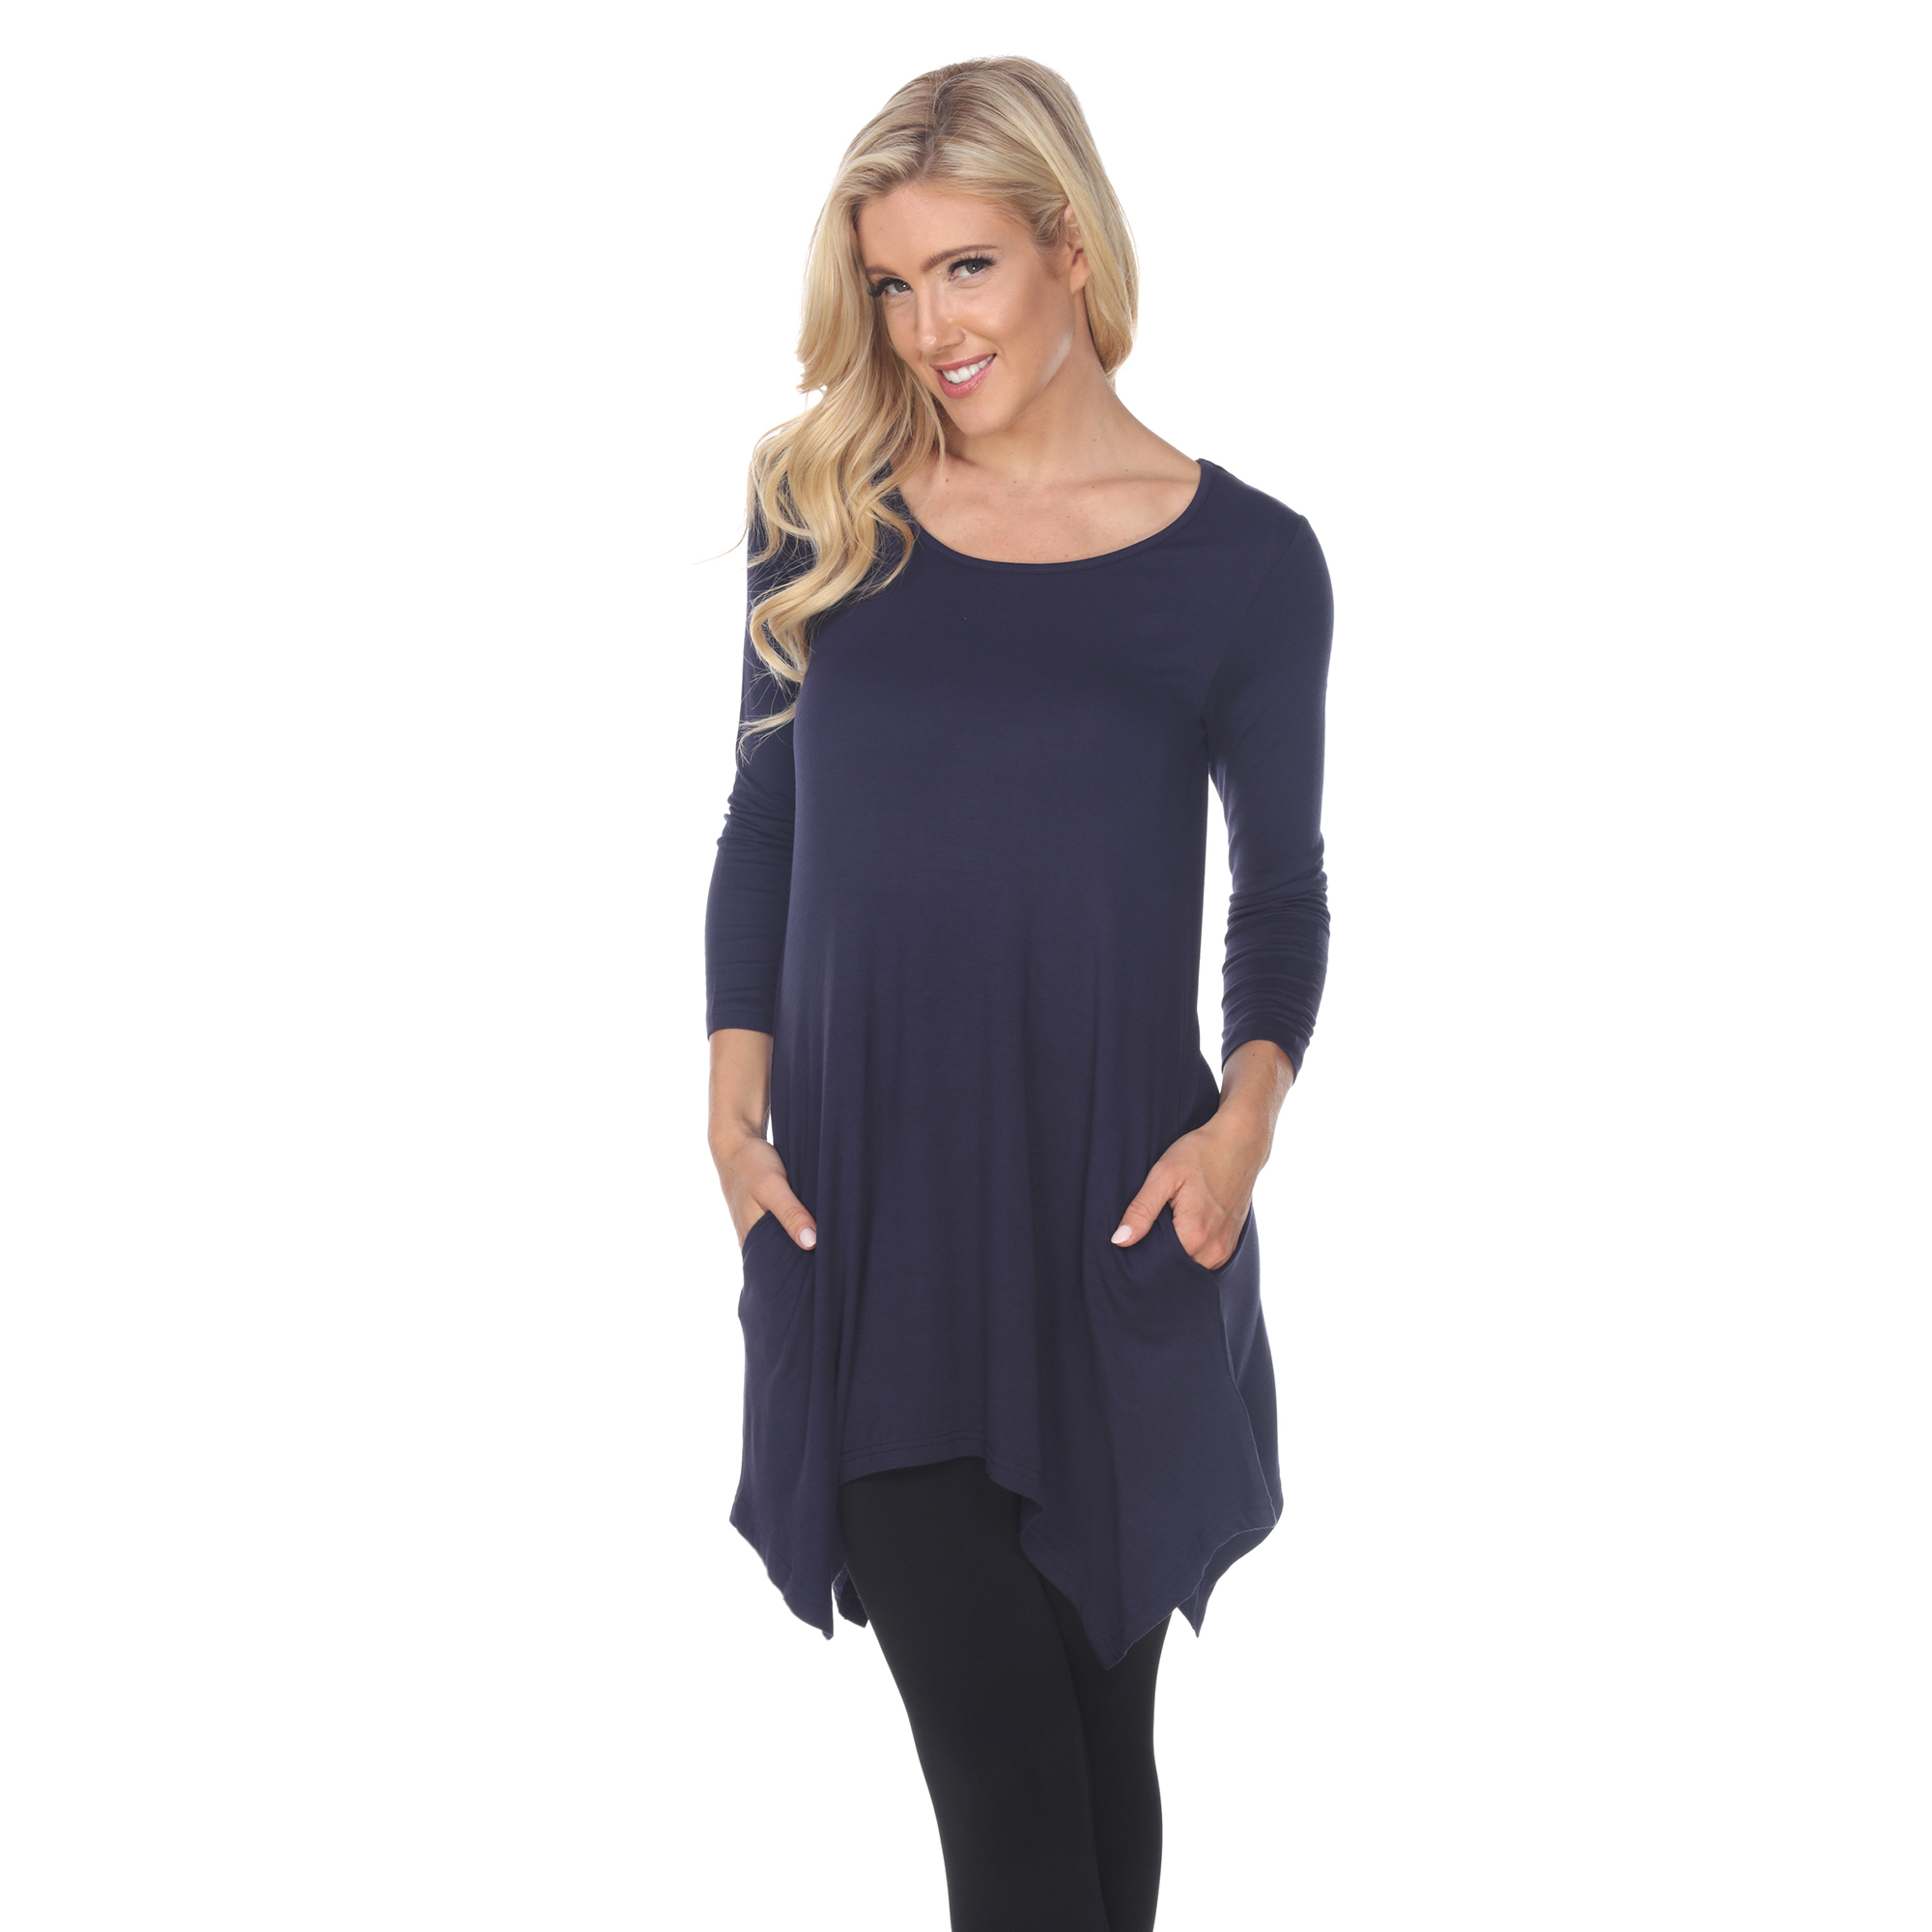 White Mark Women's Quarter Sleeve Tunic Top With Pockets - Navy, Large